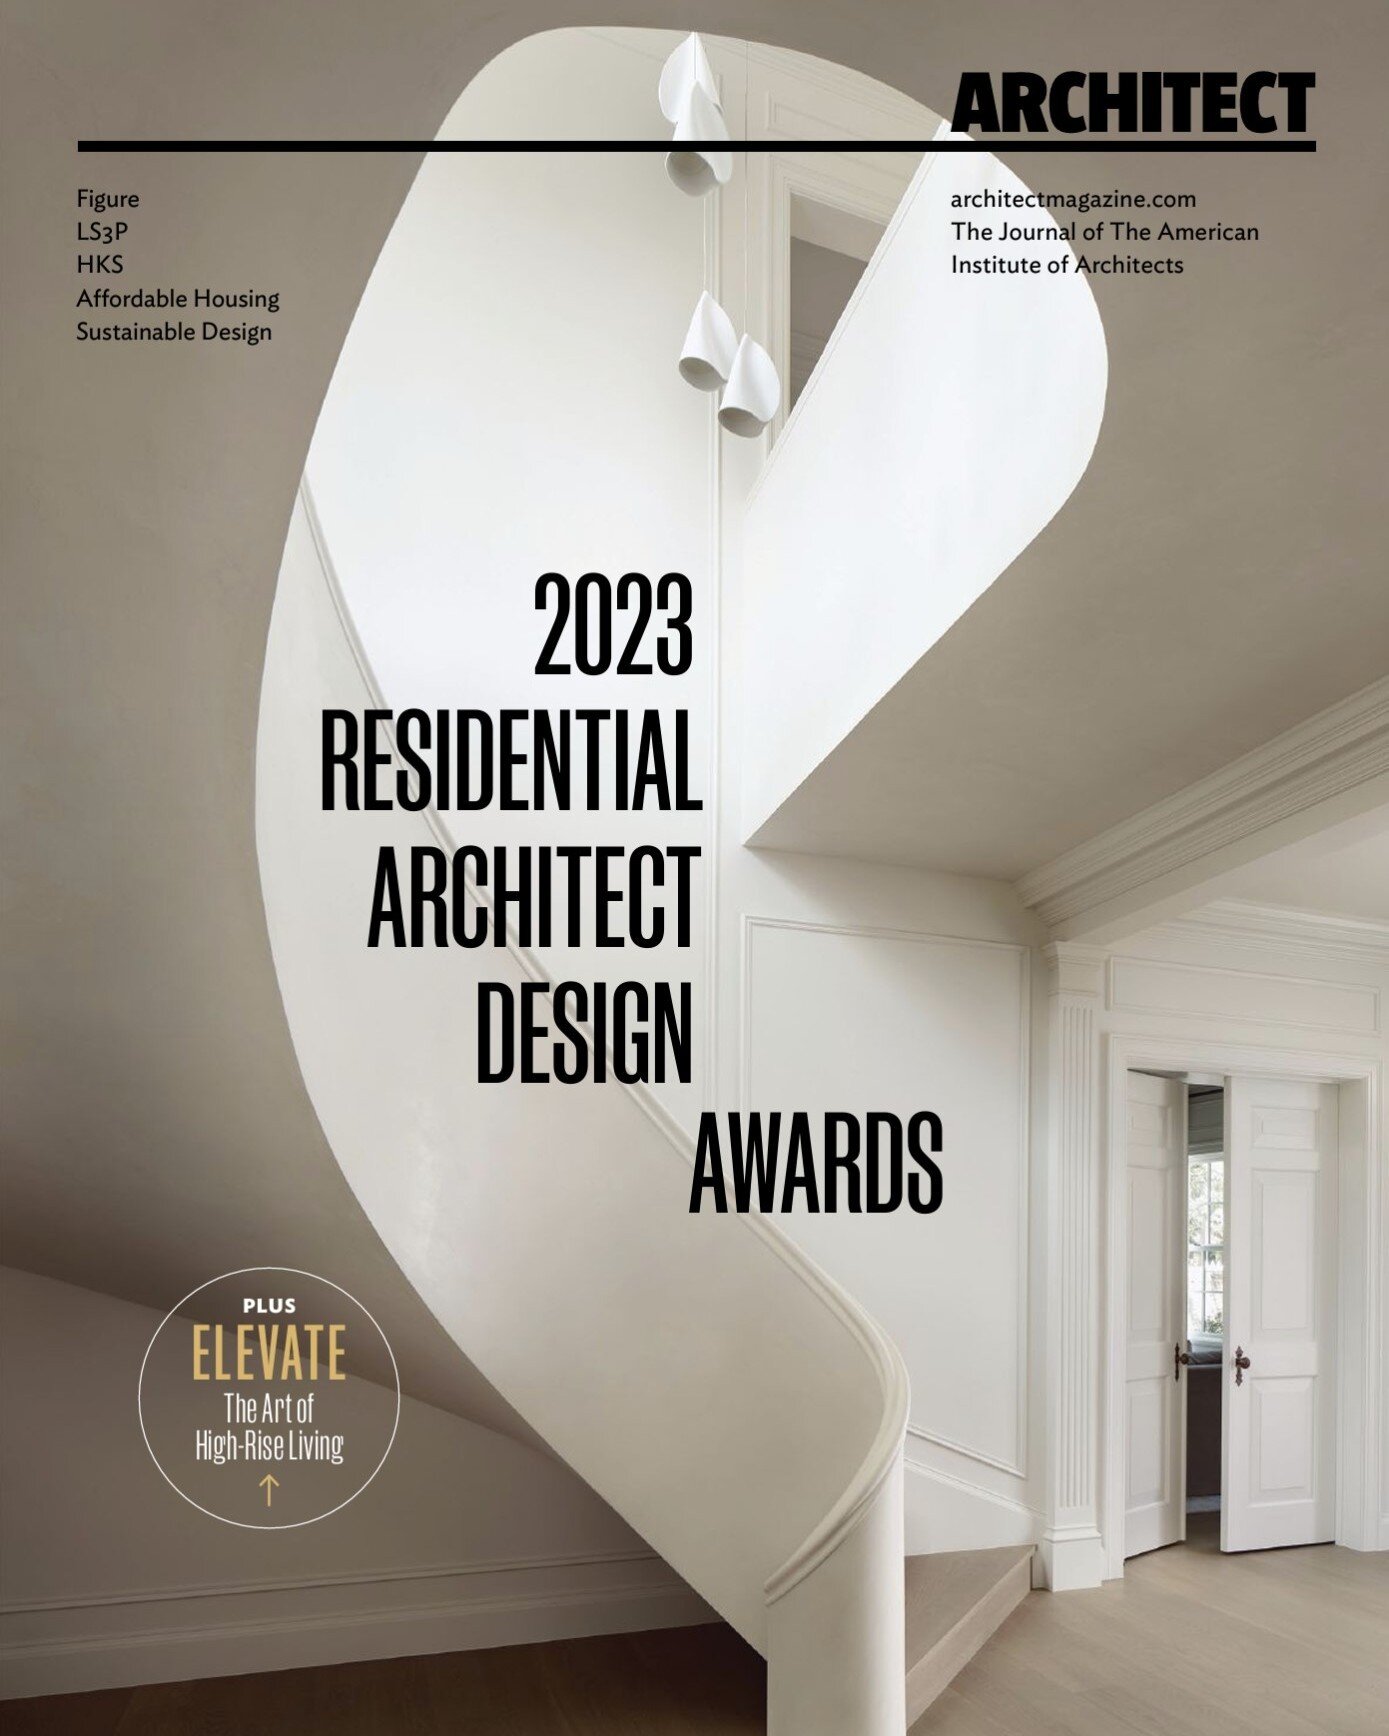 Thrilled to see our West Lynn Residence on the cover of ARCHITECT magazine!  The project was awarded the Honor Award for Renovation / Adaptive Reuse, and its sculptural stair selected for the cover.  Our heartfelt thanks to everyone involved in the p